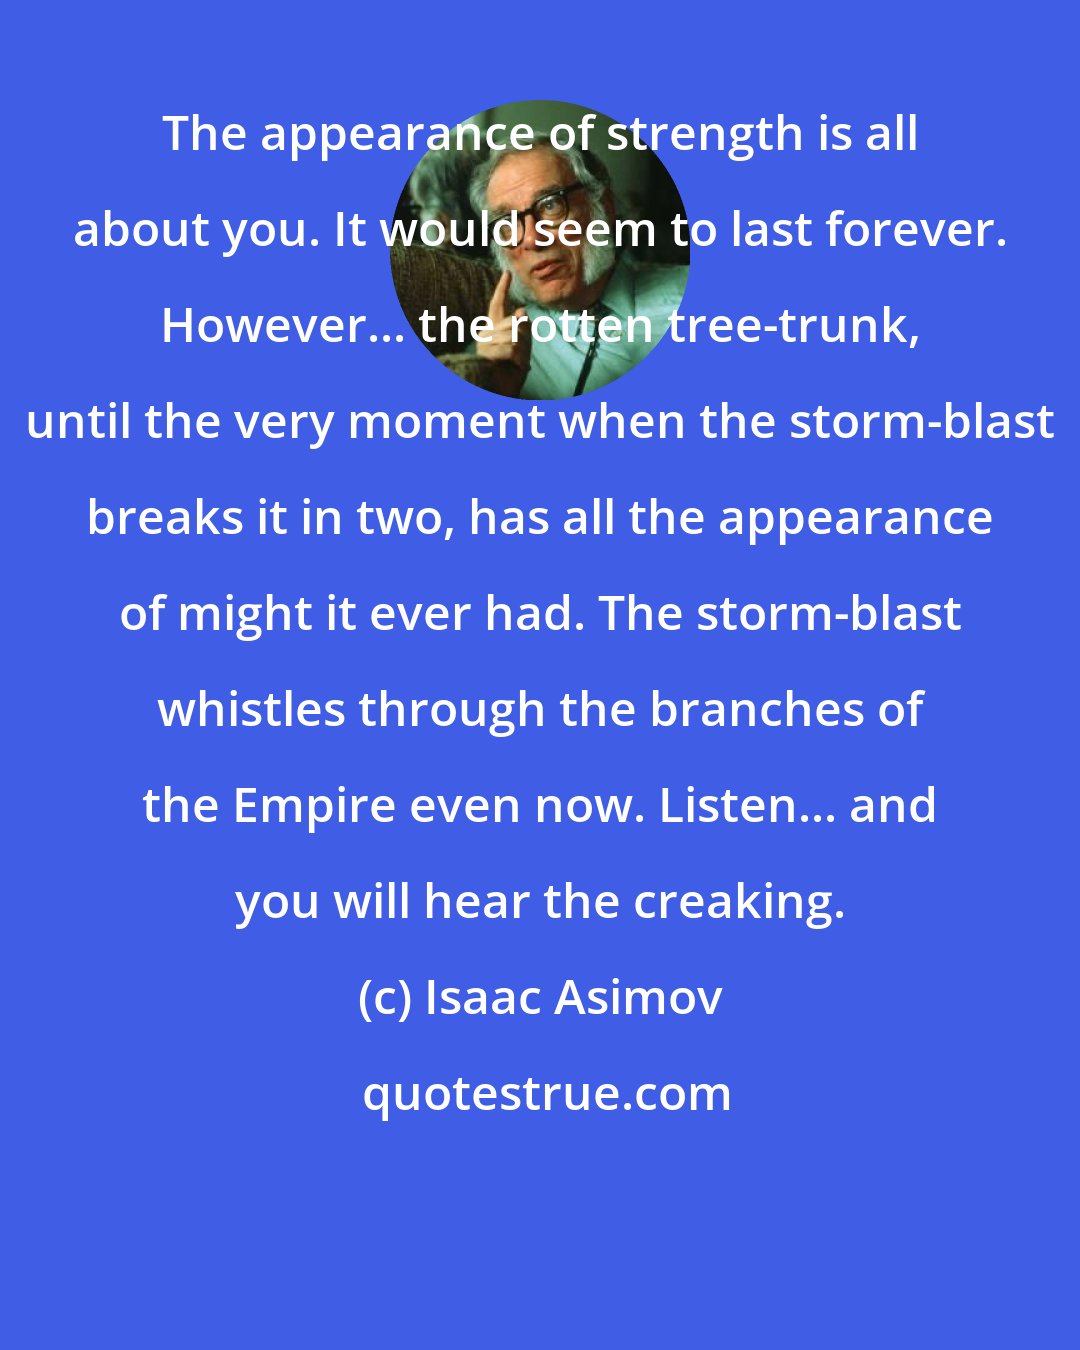 Isaac Asimov: The appearance of strength is all about you. It would seem to last forever. However... the rotten tree-trunk, until the very moment when the storm-blast breaks it in two, has all the appearance of might it ever had. The storm-blast whistles through the branches of the Empire even now. Listen... and you will hear the creaking.